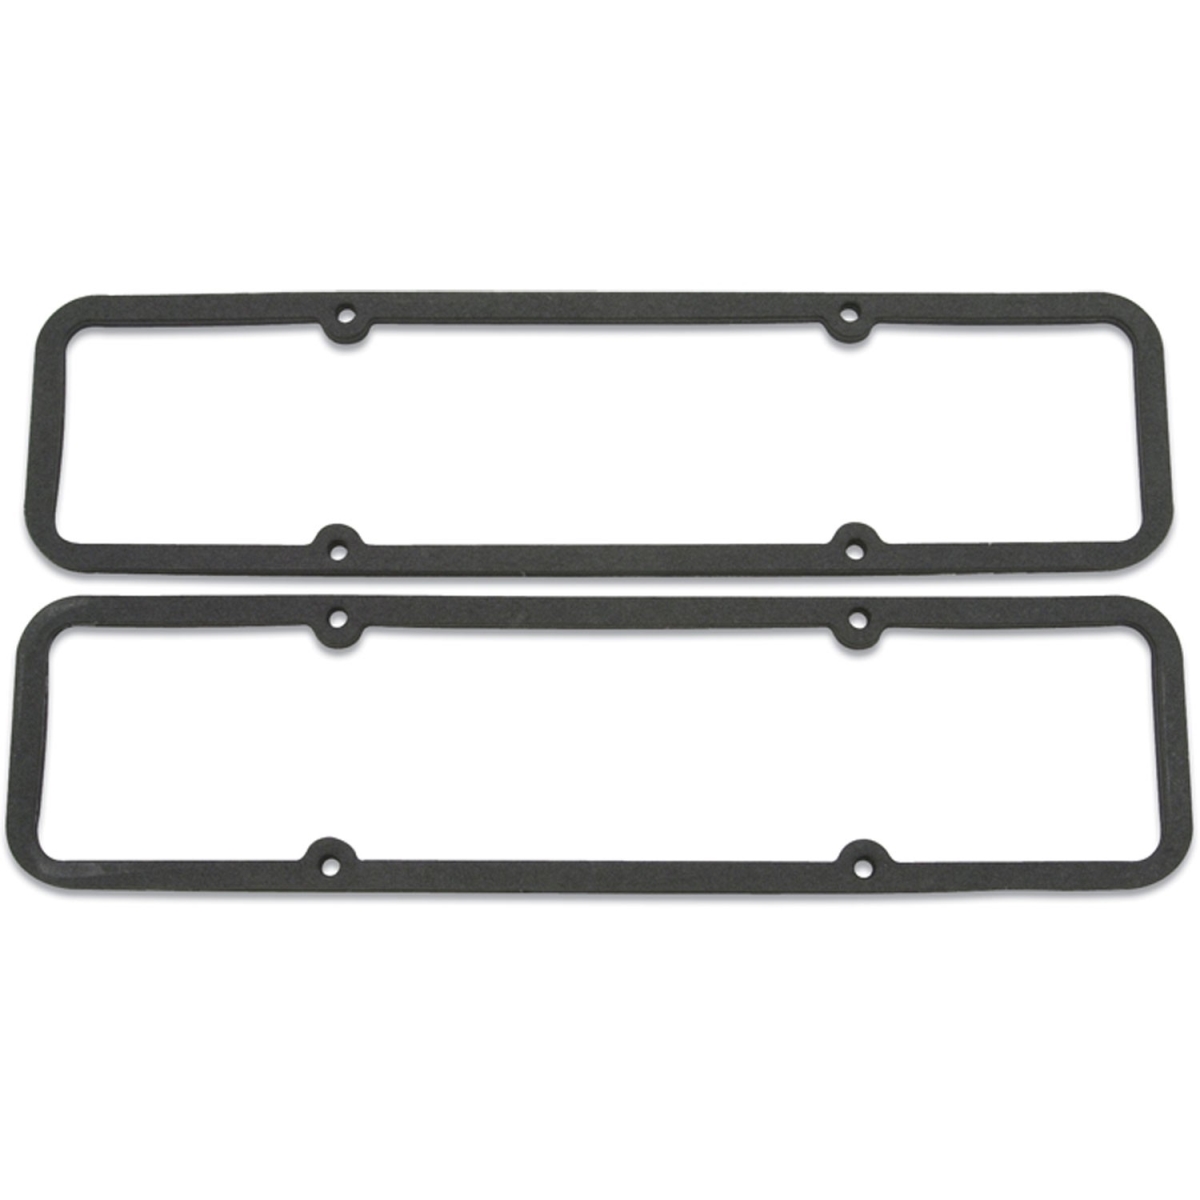 Picture of Edelbrock E11-7549 Valve Cover Gasket for Small Block - Chevy